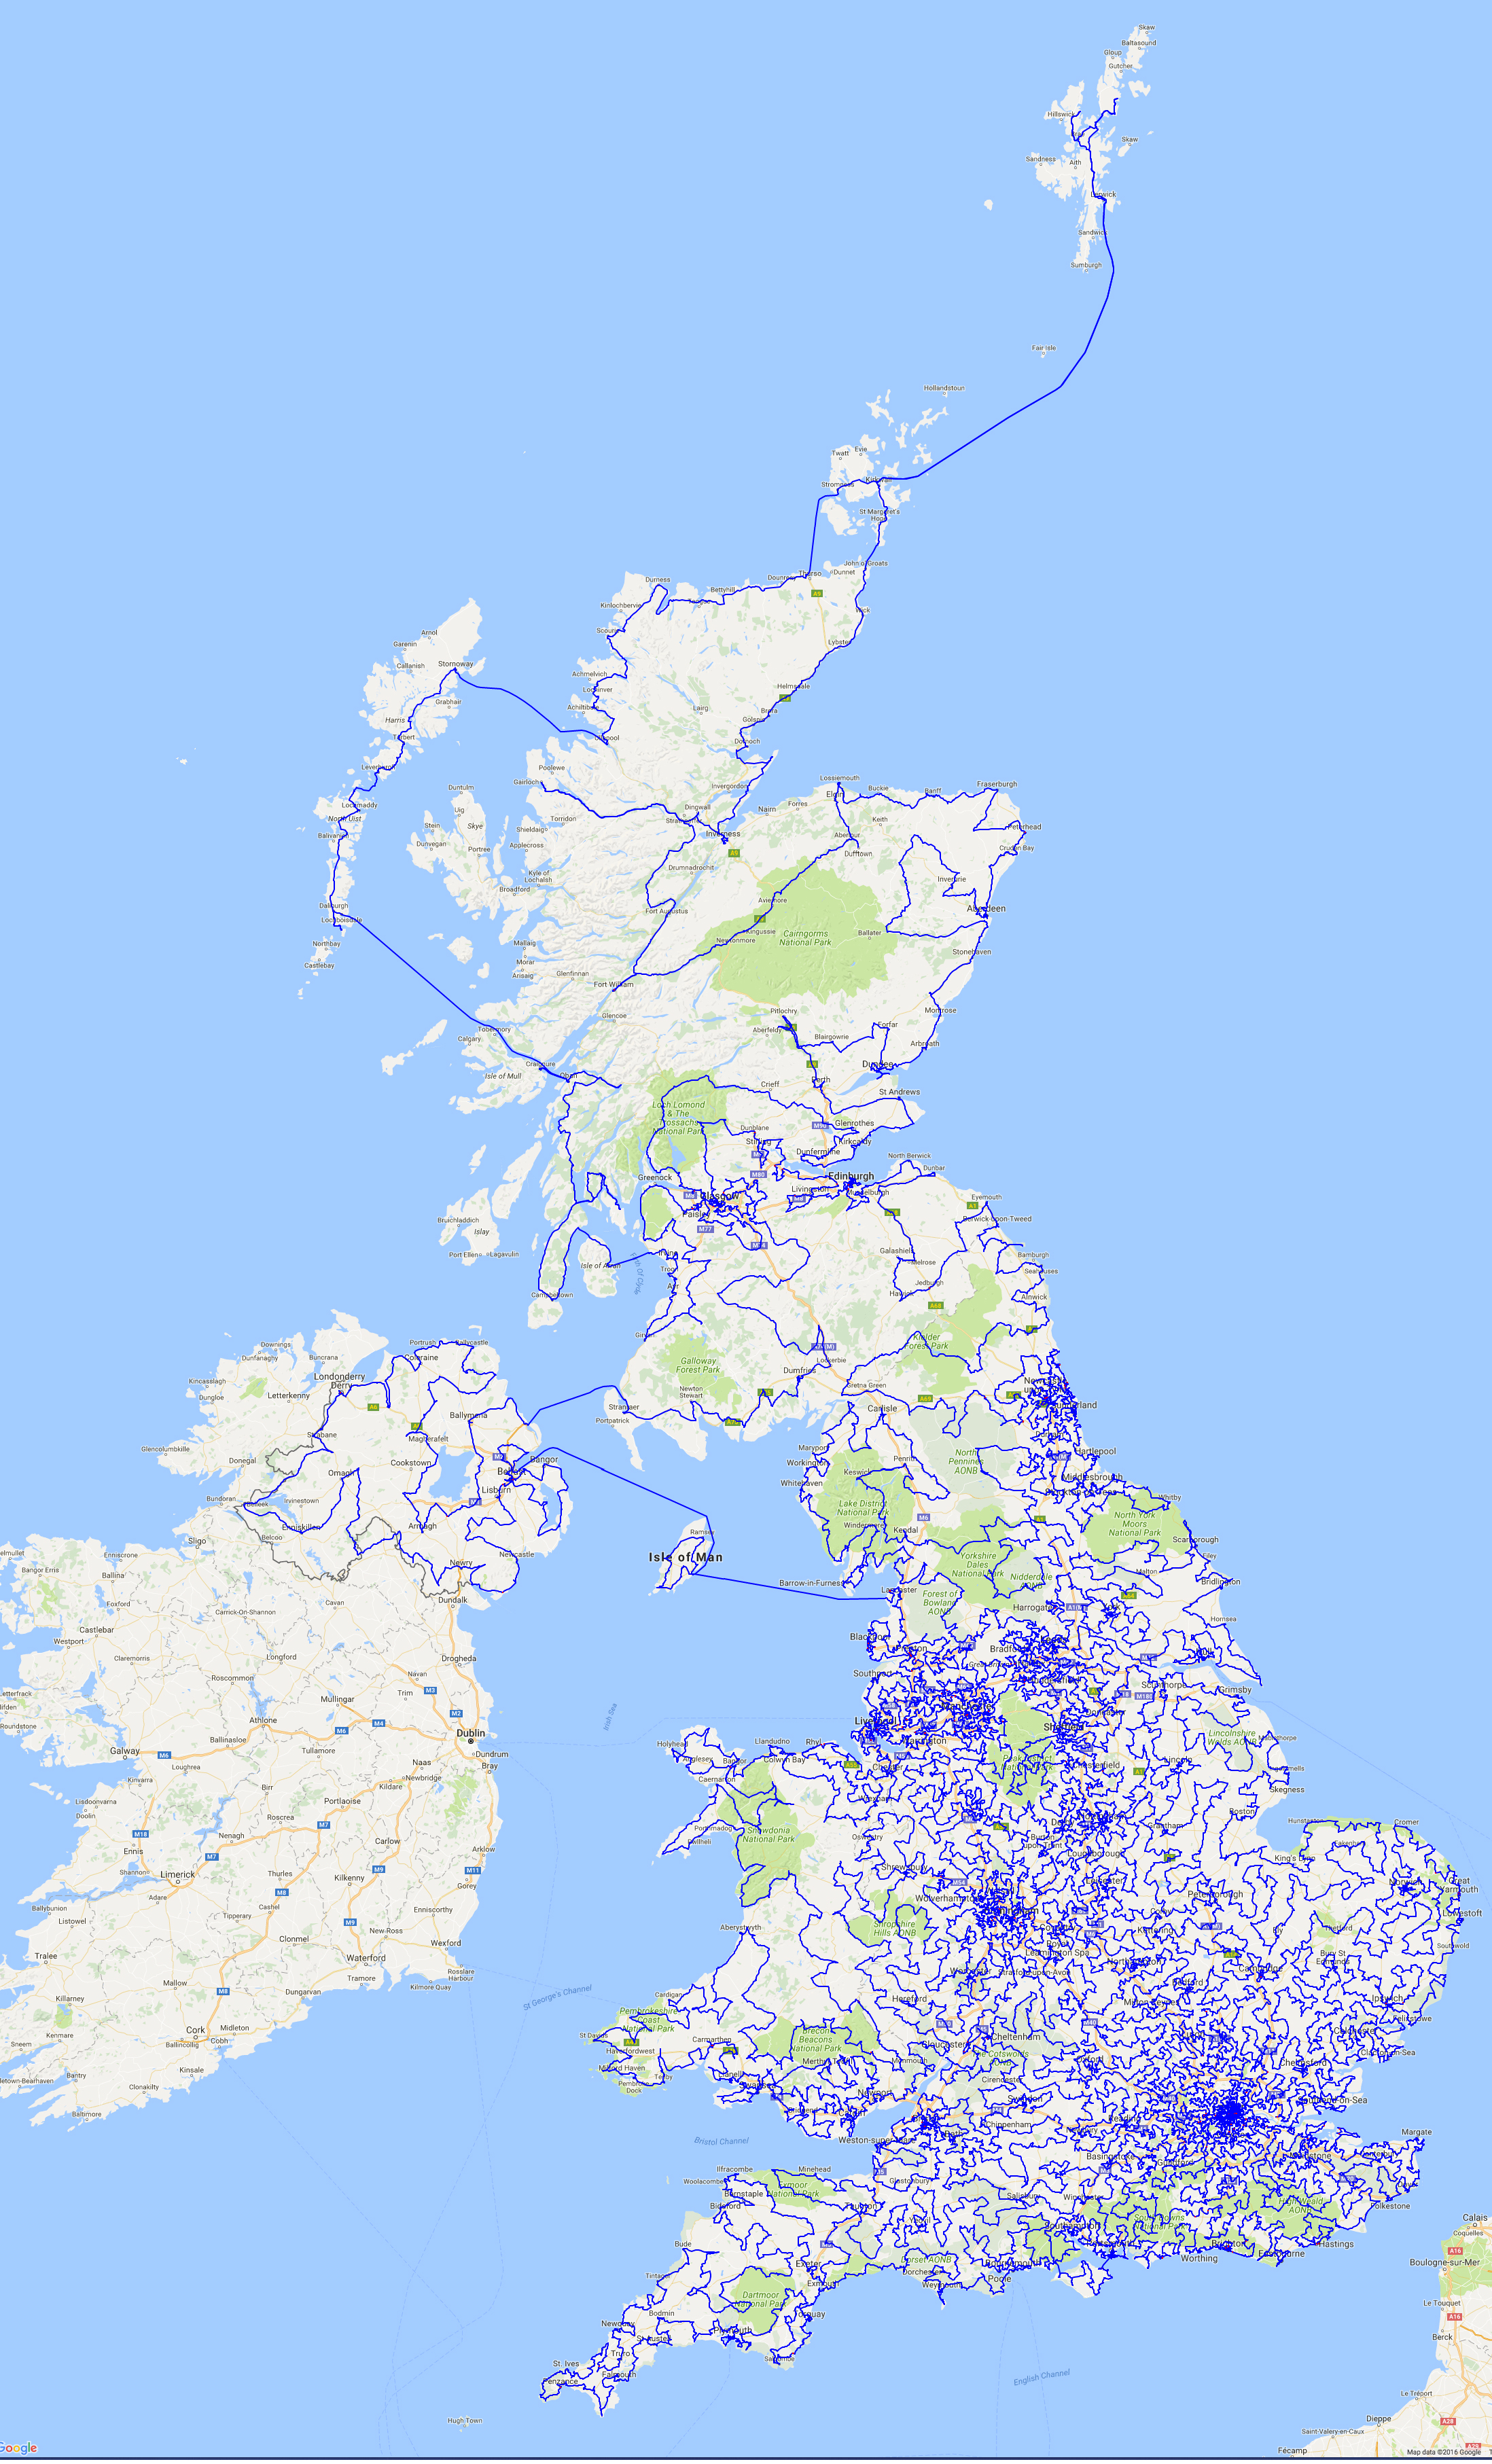 A walking tour of the UK’s pubs. A fine application of the Traveling Salesman Problem